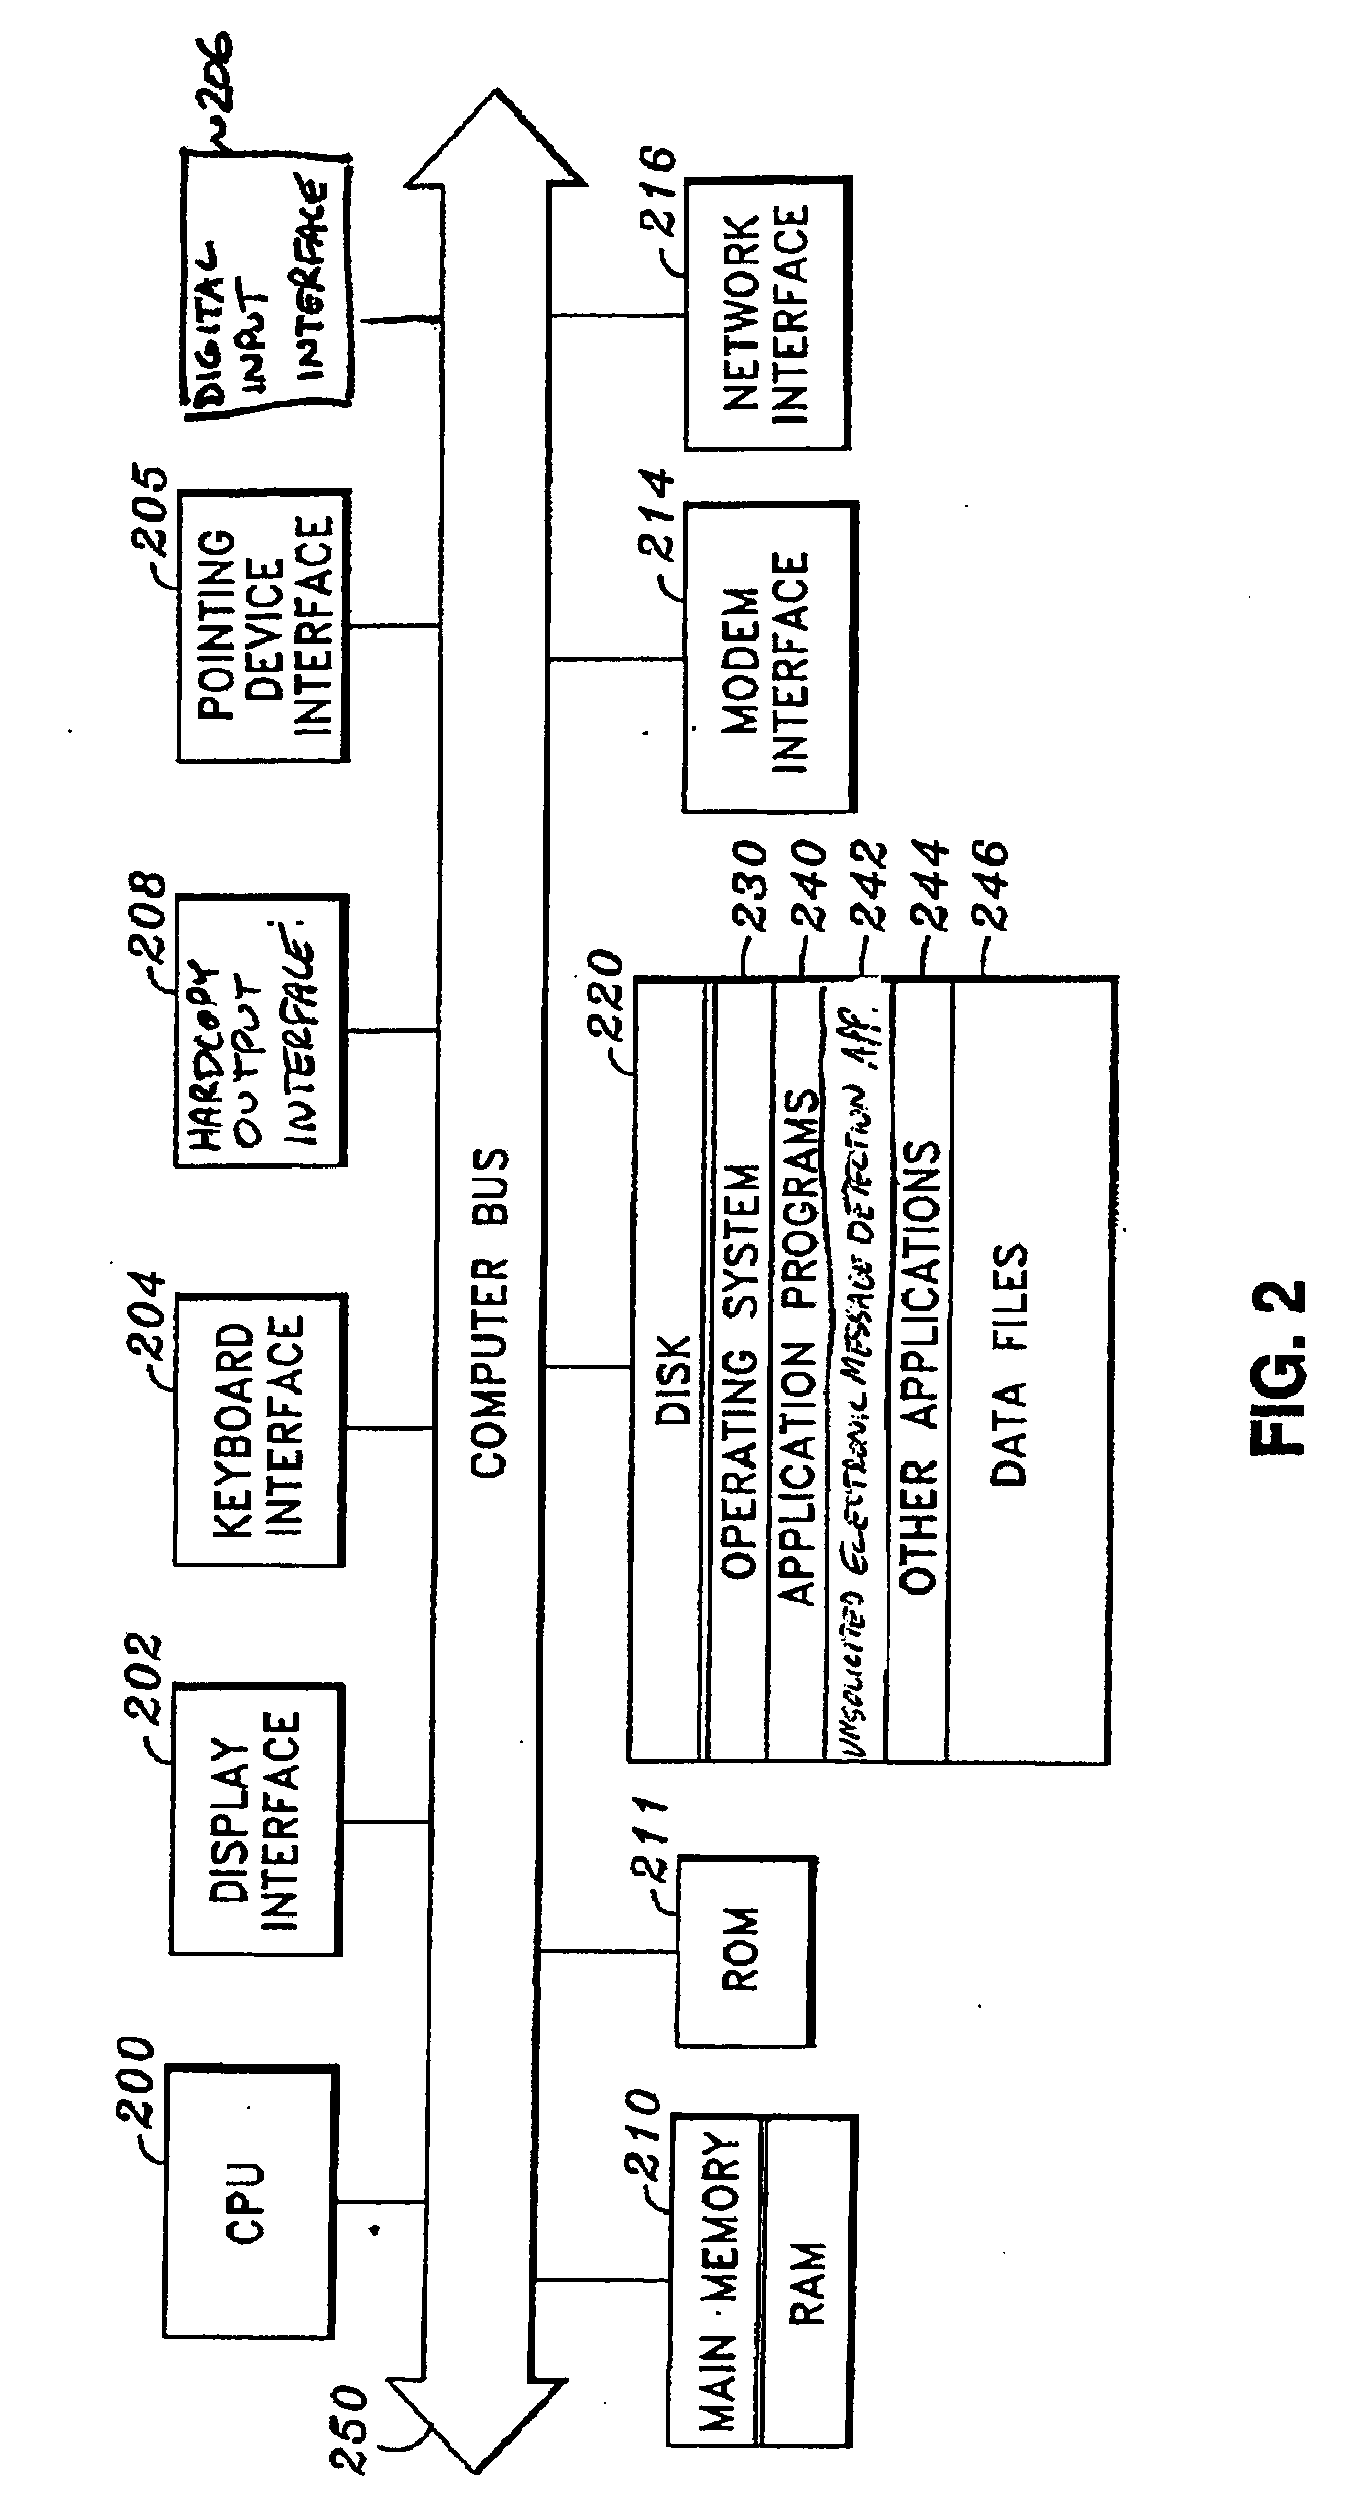 Detection of unsolicited electronic messages